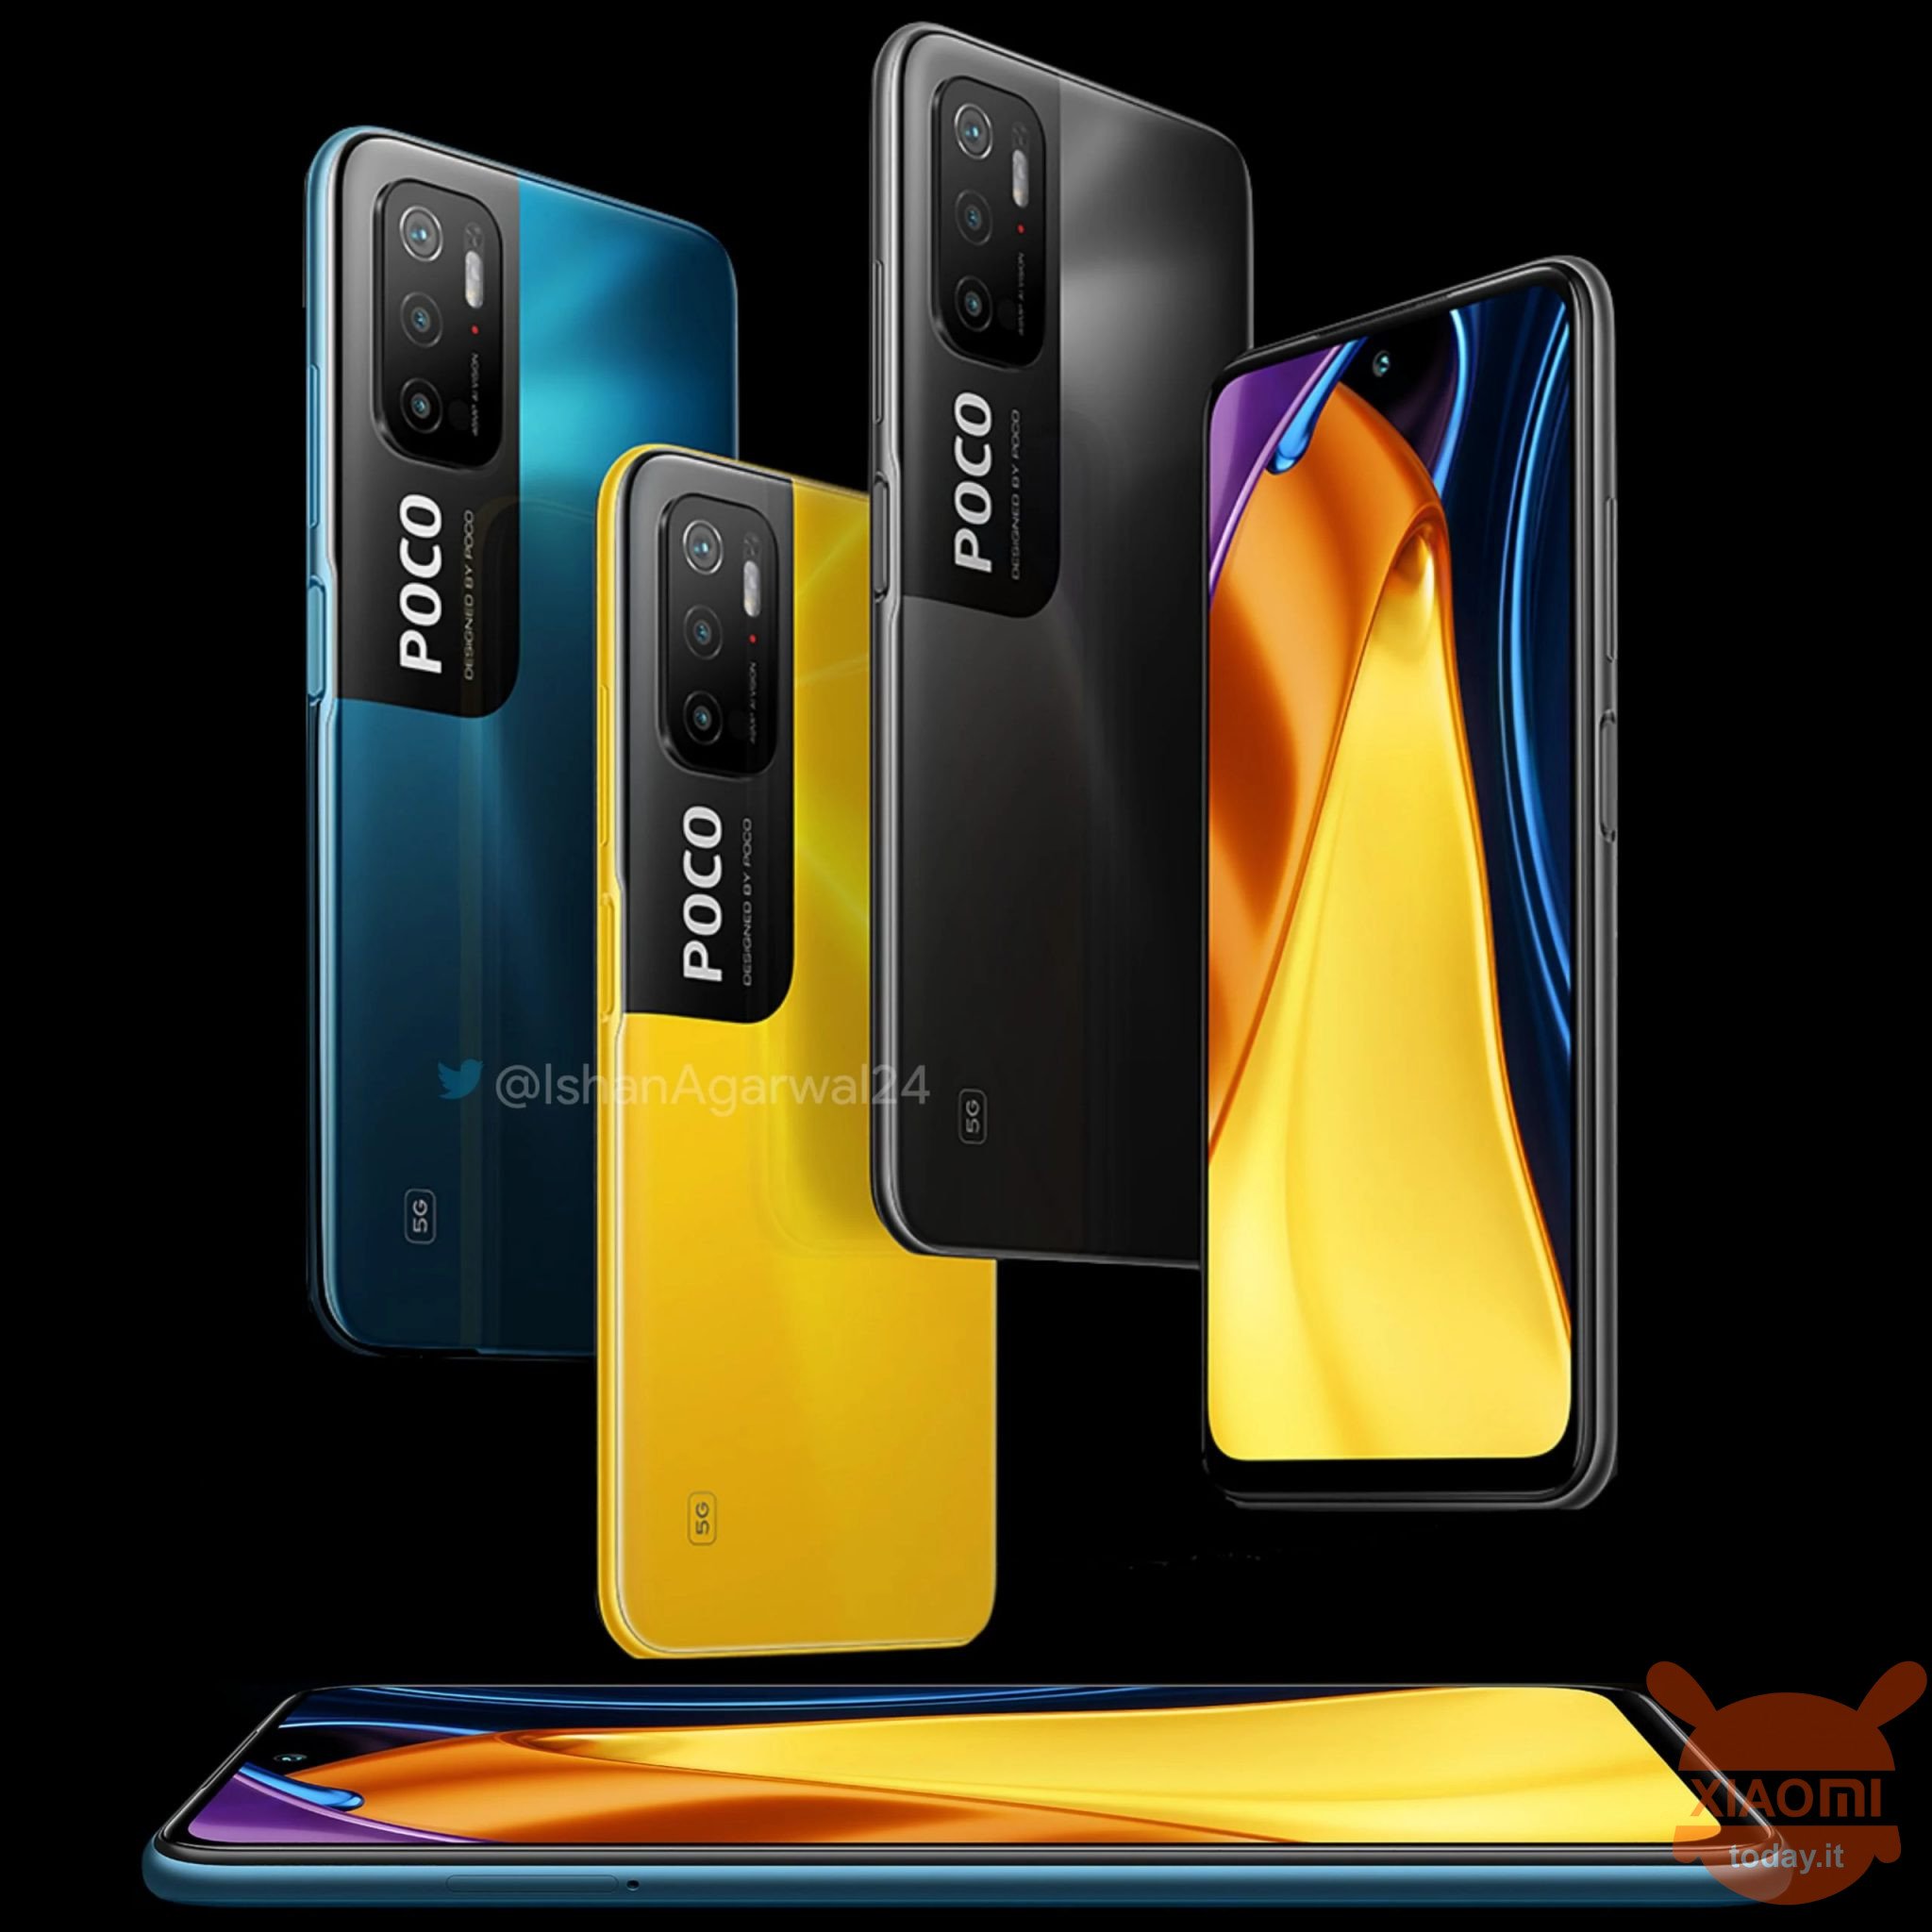 POCO M3 Pro is coming to Italy! Here's what we know about him